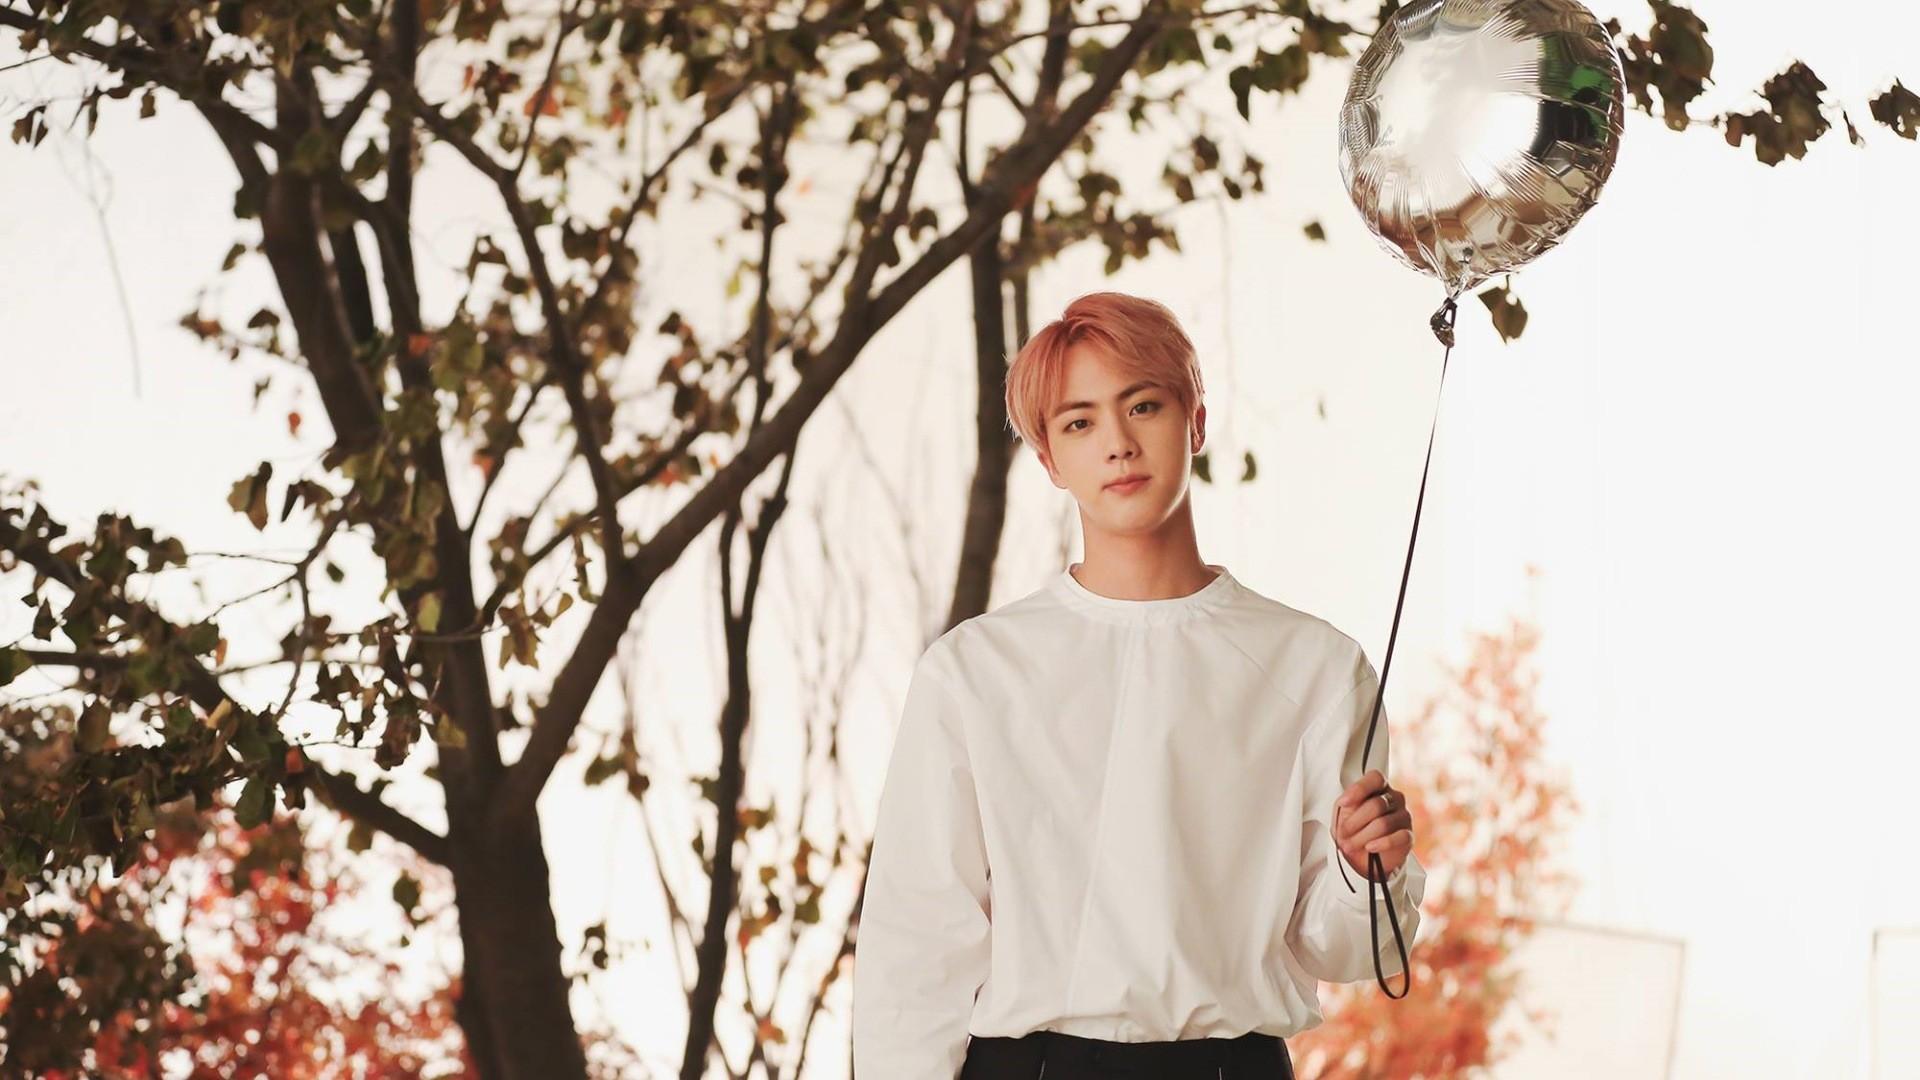 Jin From K Pop Superband BTS: His Past, His Private Thoughts And Why